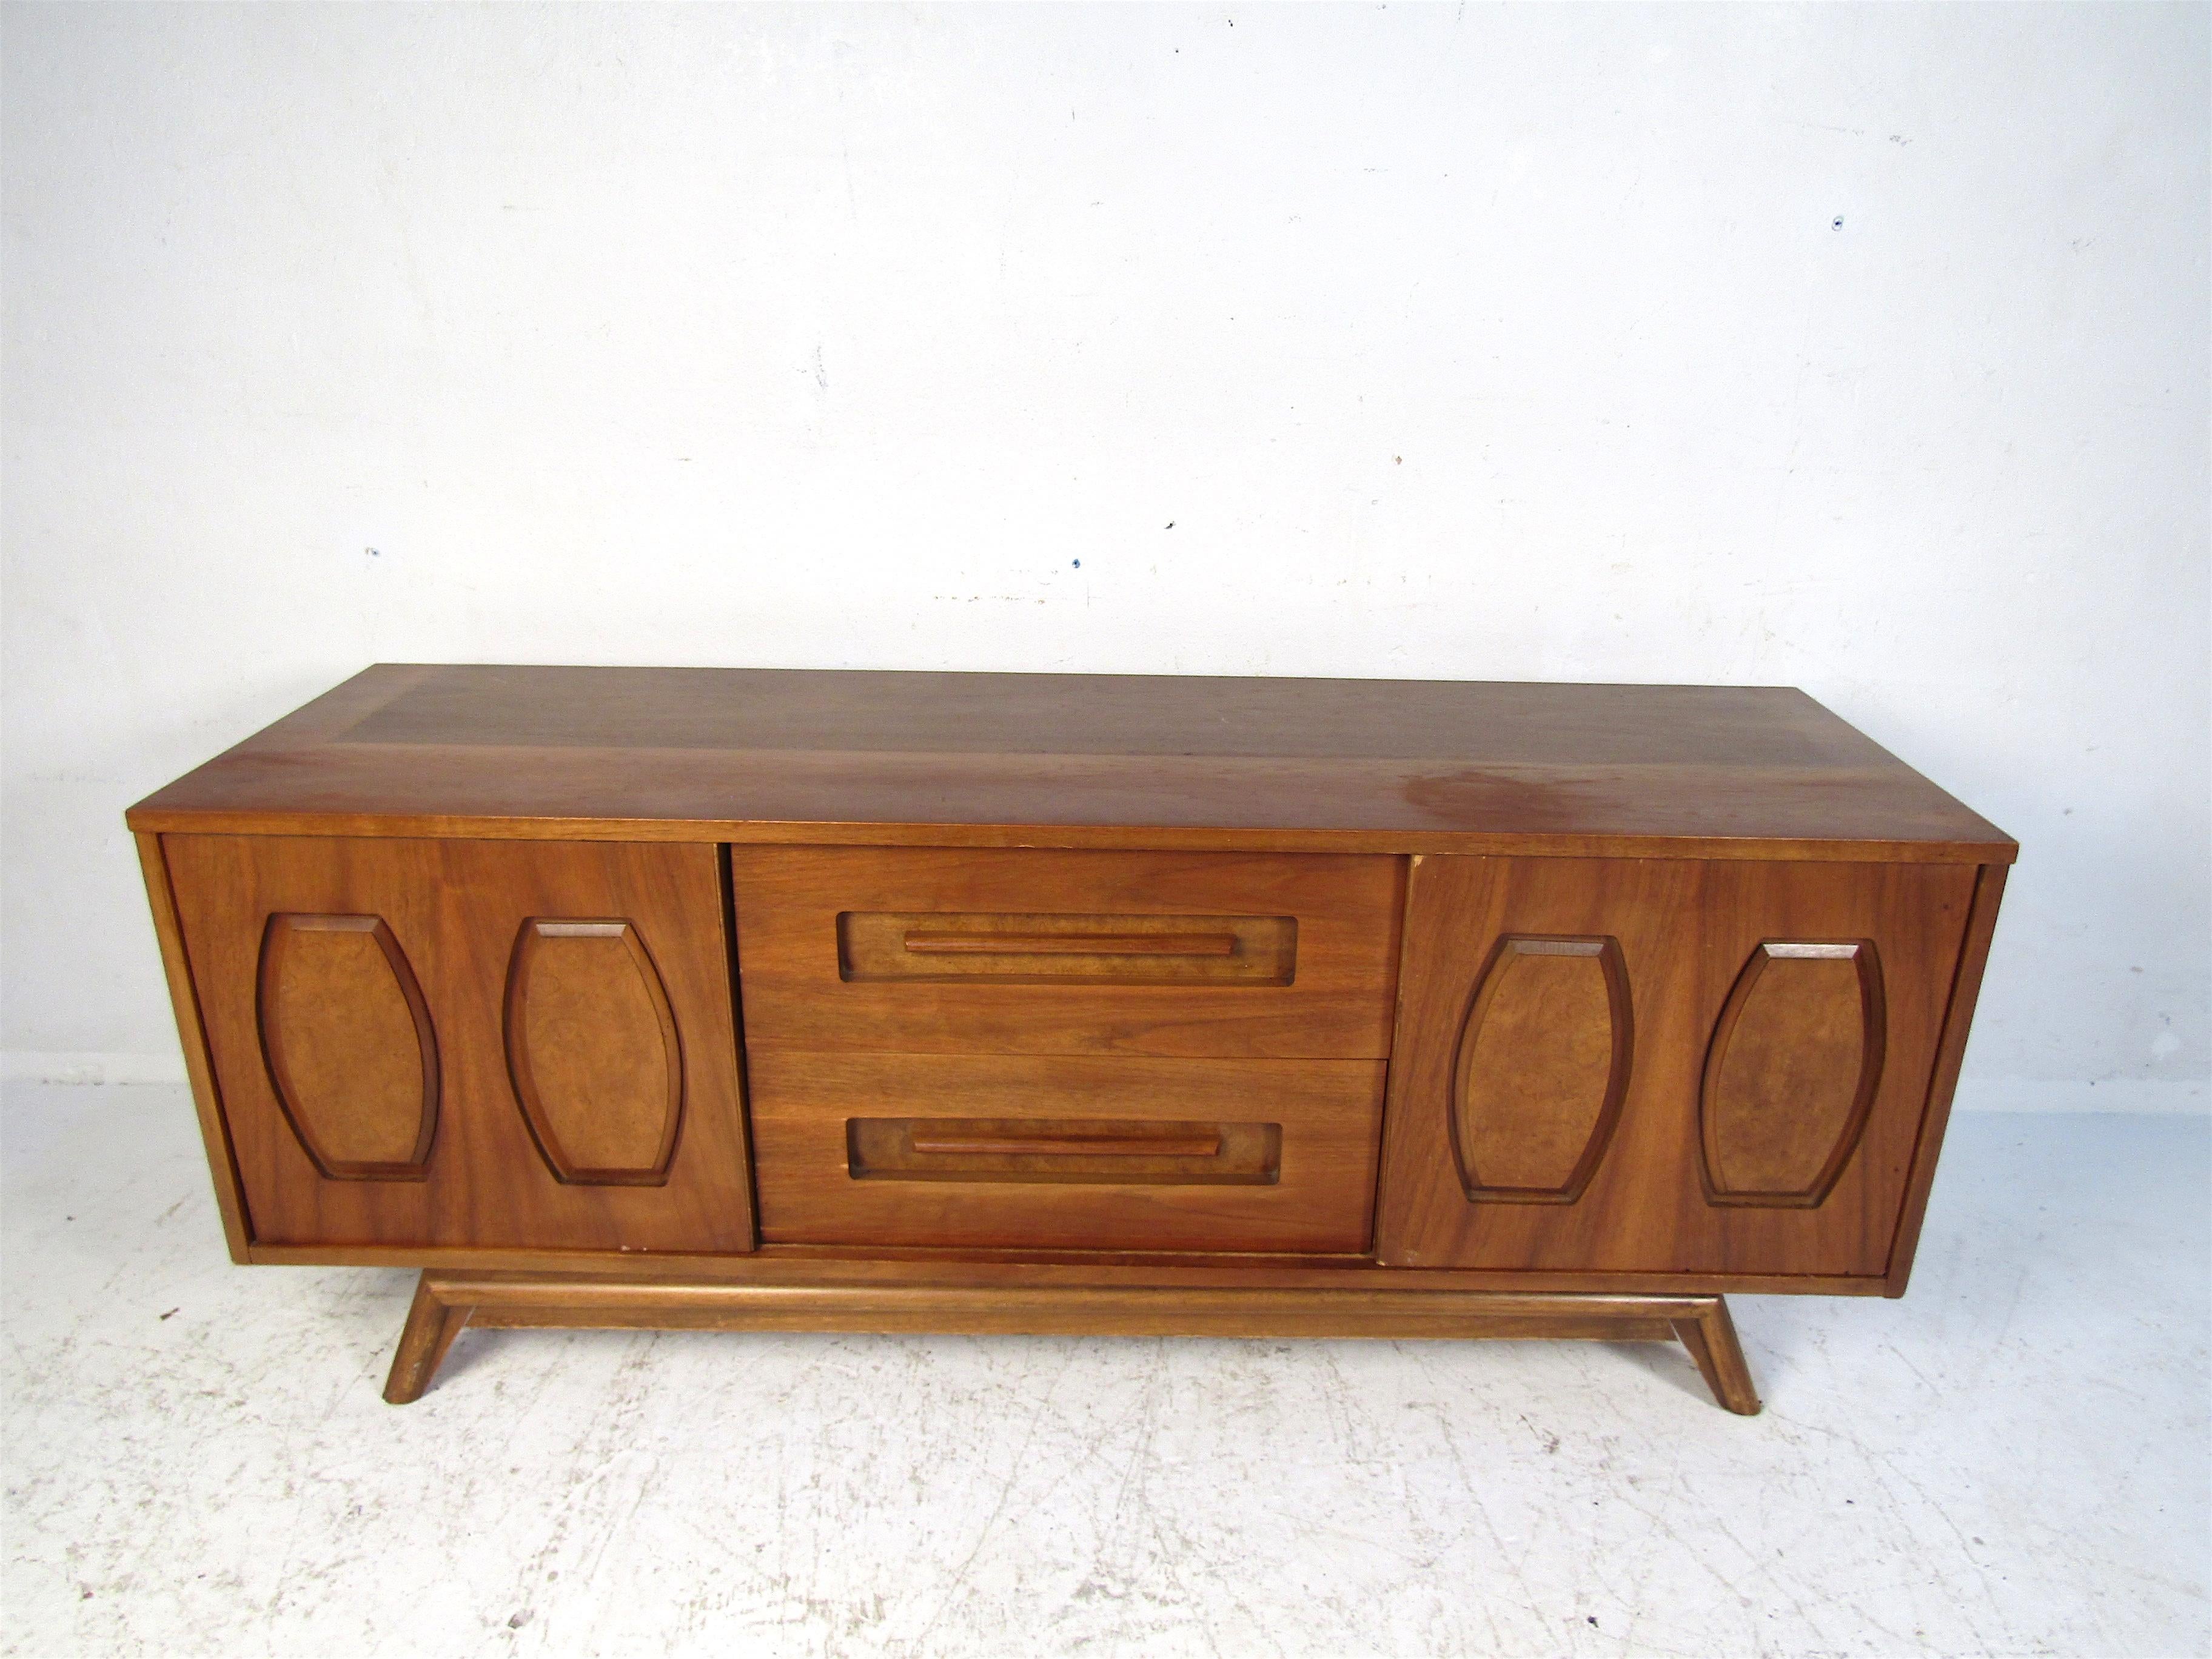 Beautiful dark wood serving credenza will fit perfectly in any dining room set up. With clean lines and a Classic style, this piece is sure to please. Ample storage and easy access drawers make this piece both beautiful and functional. Please